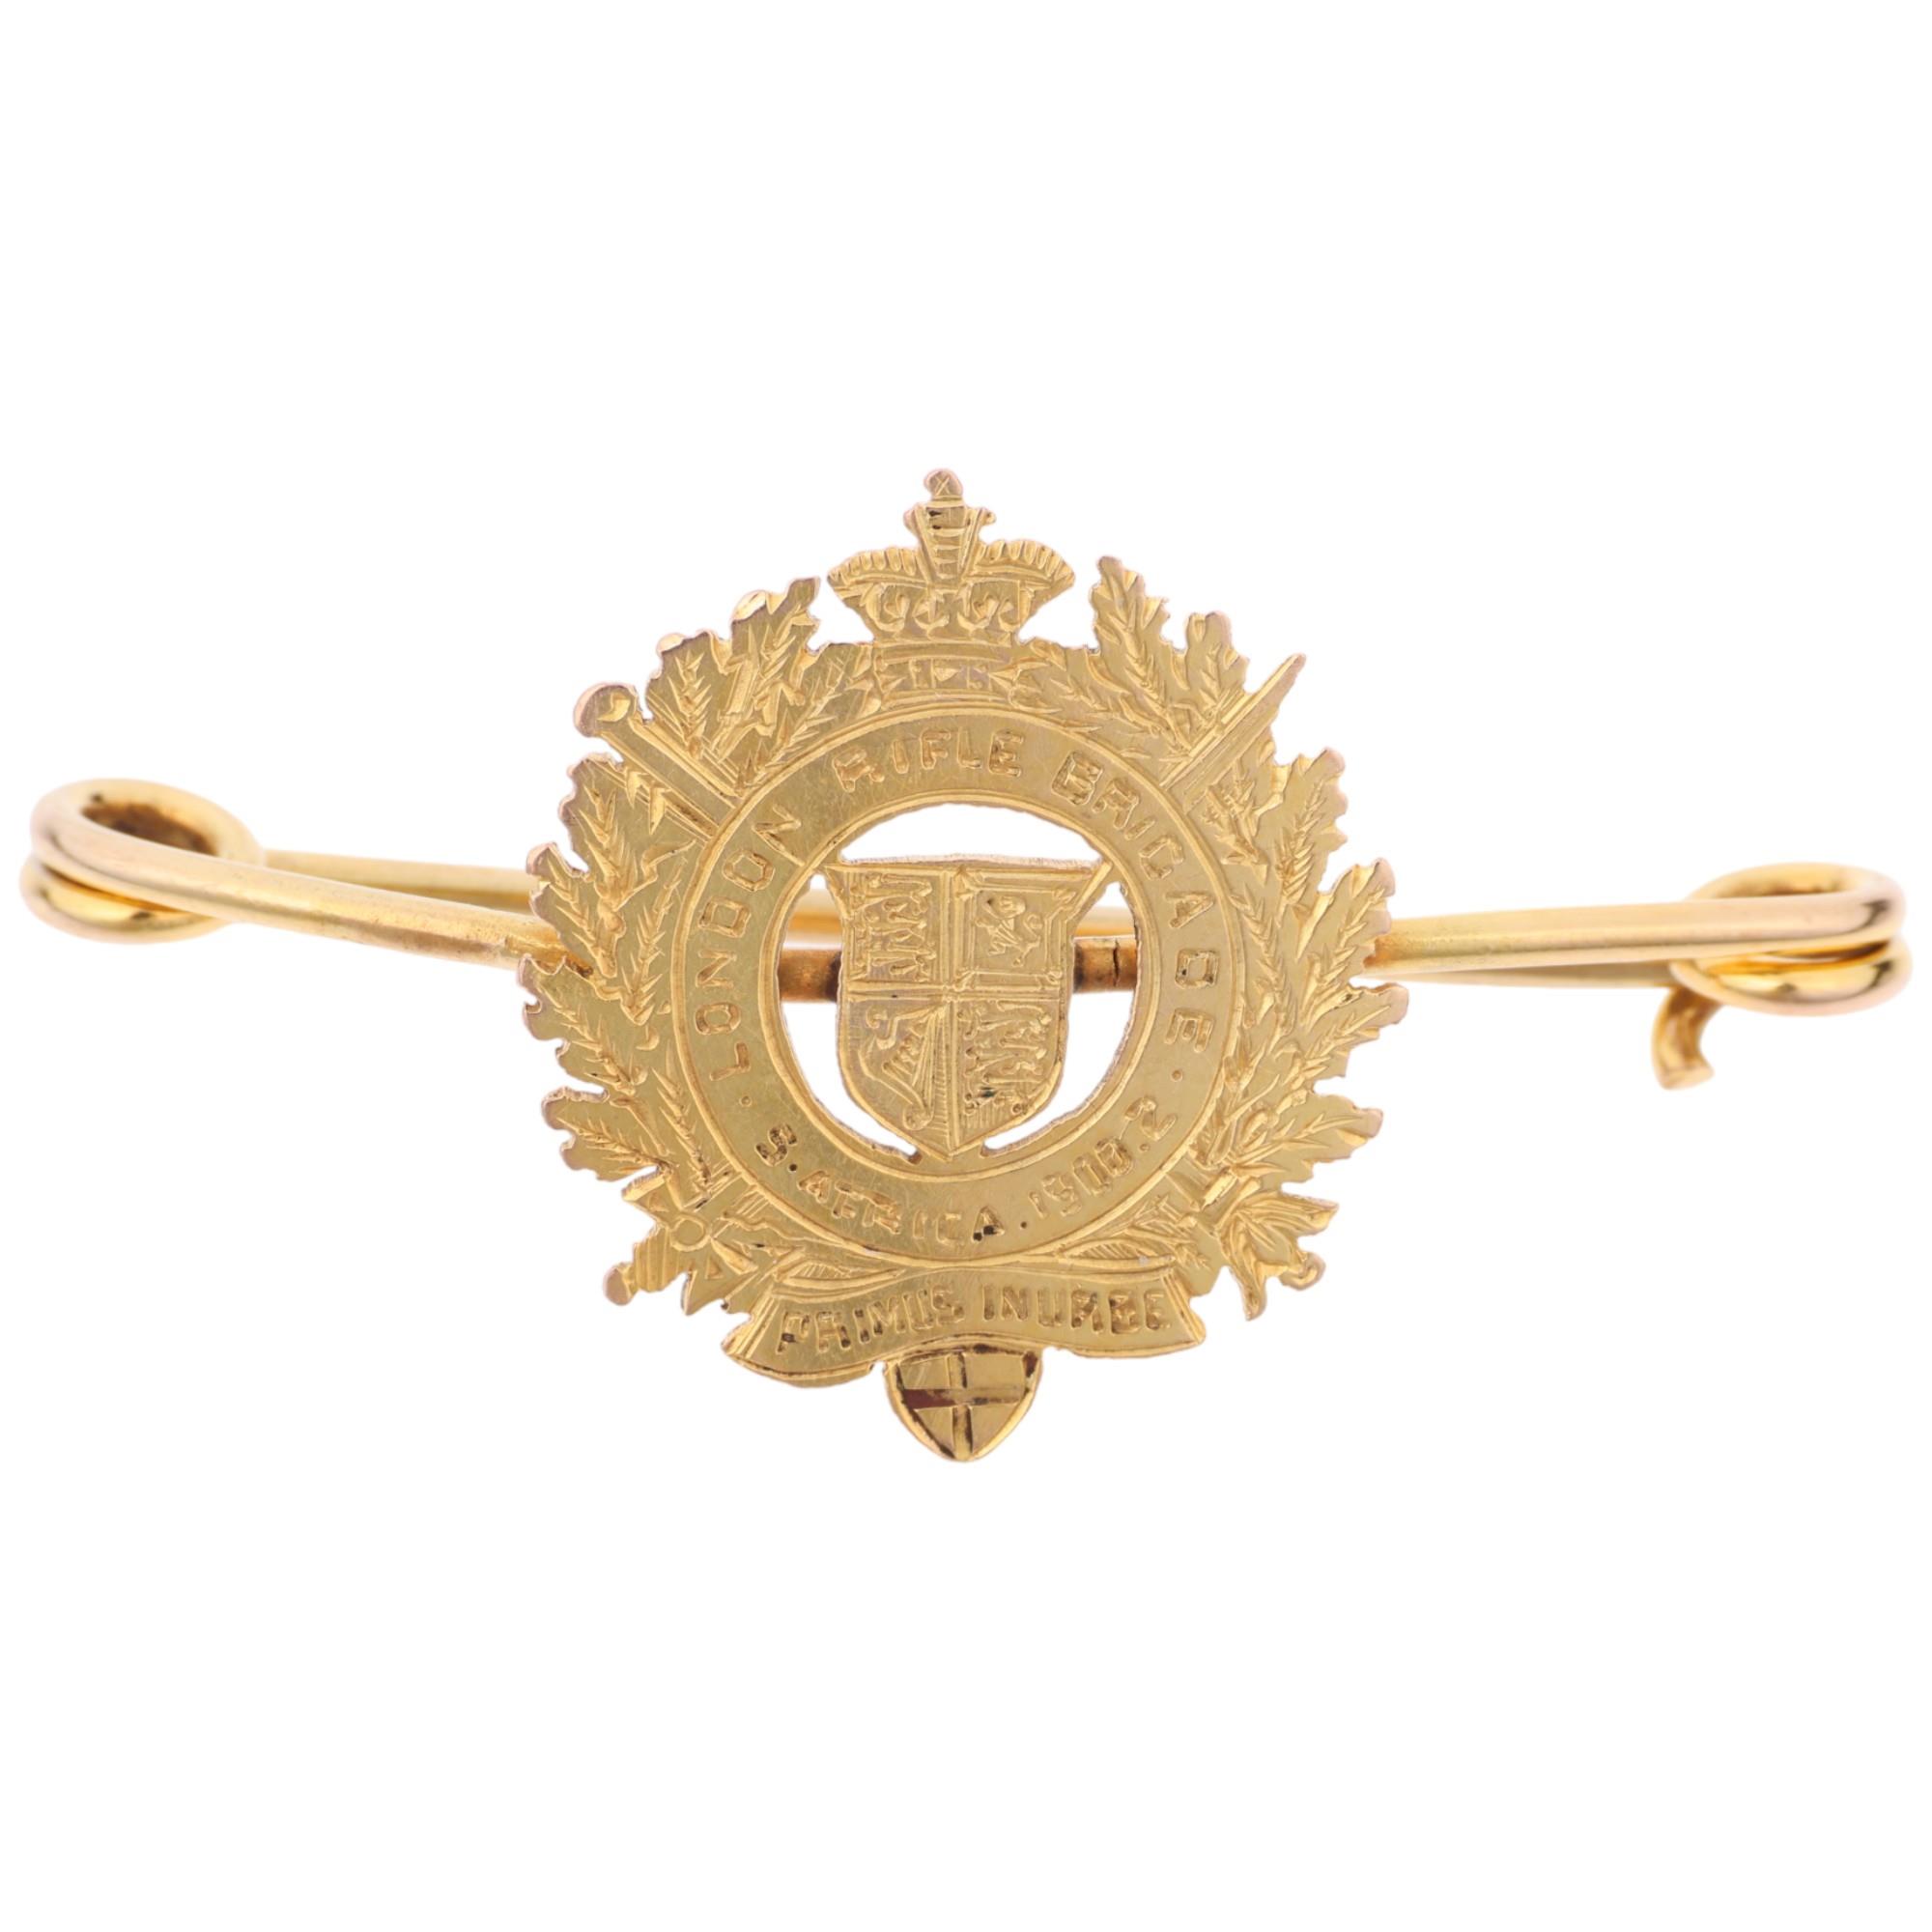 An early 20th century 9ct gold London Rifle Brigade military sweetheart bar brooch, South Africa